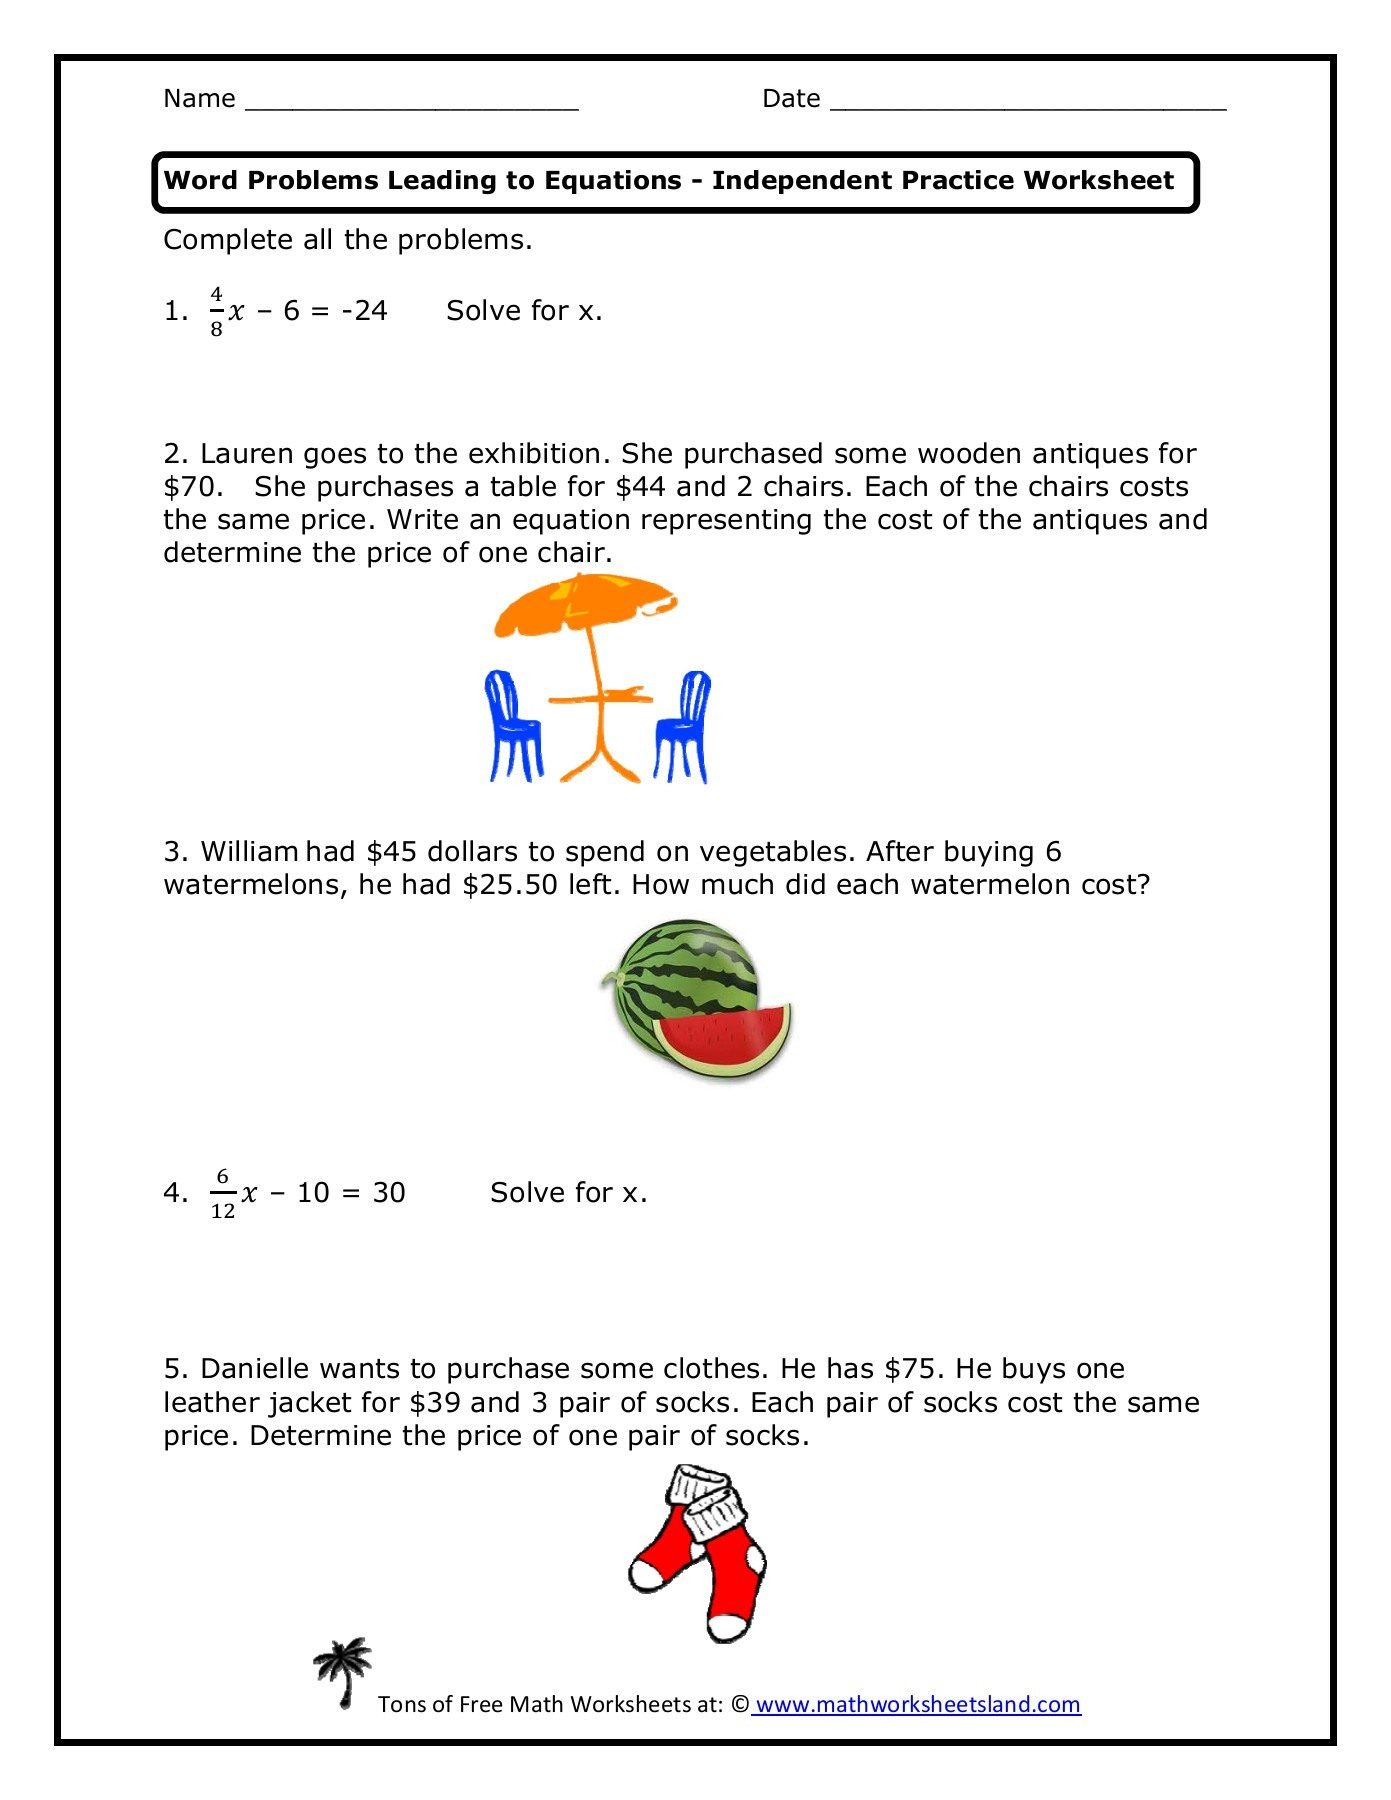 word-problems-leading-to-equations-independent-practice-db-excel